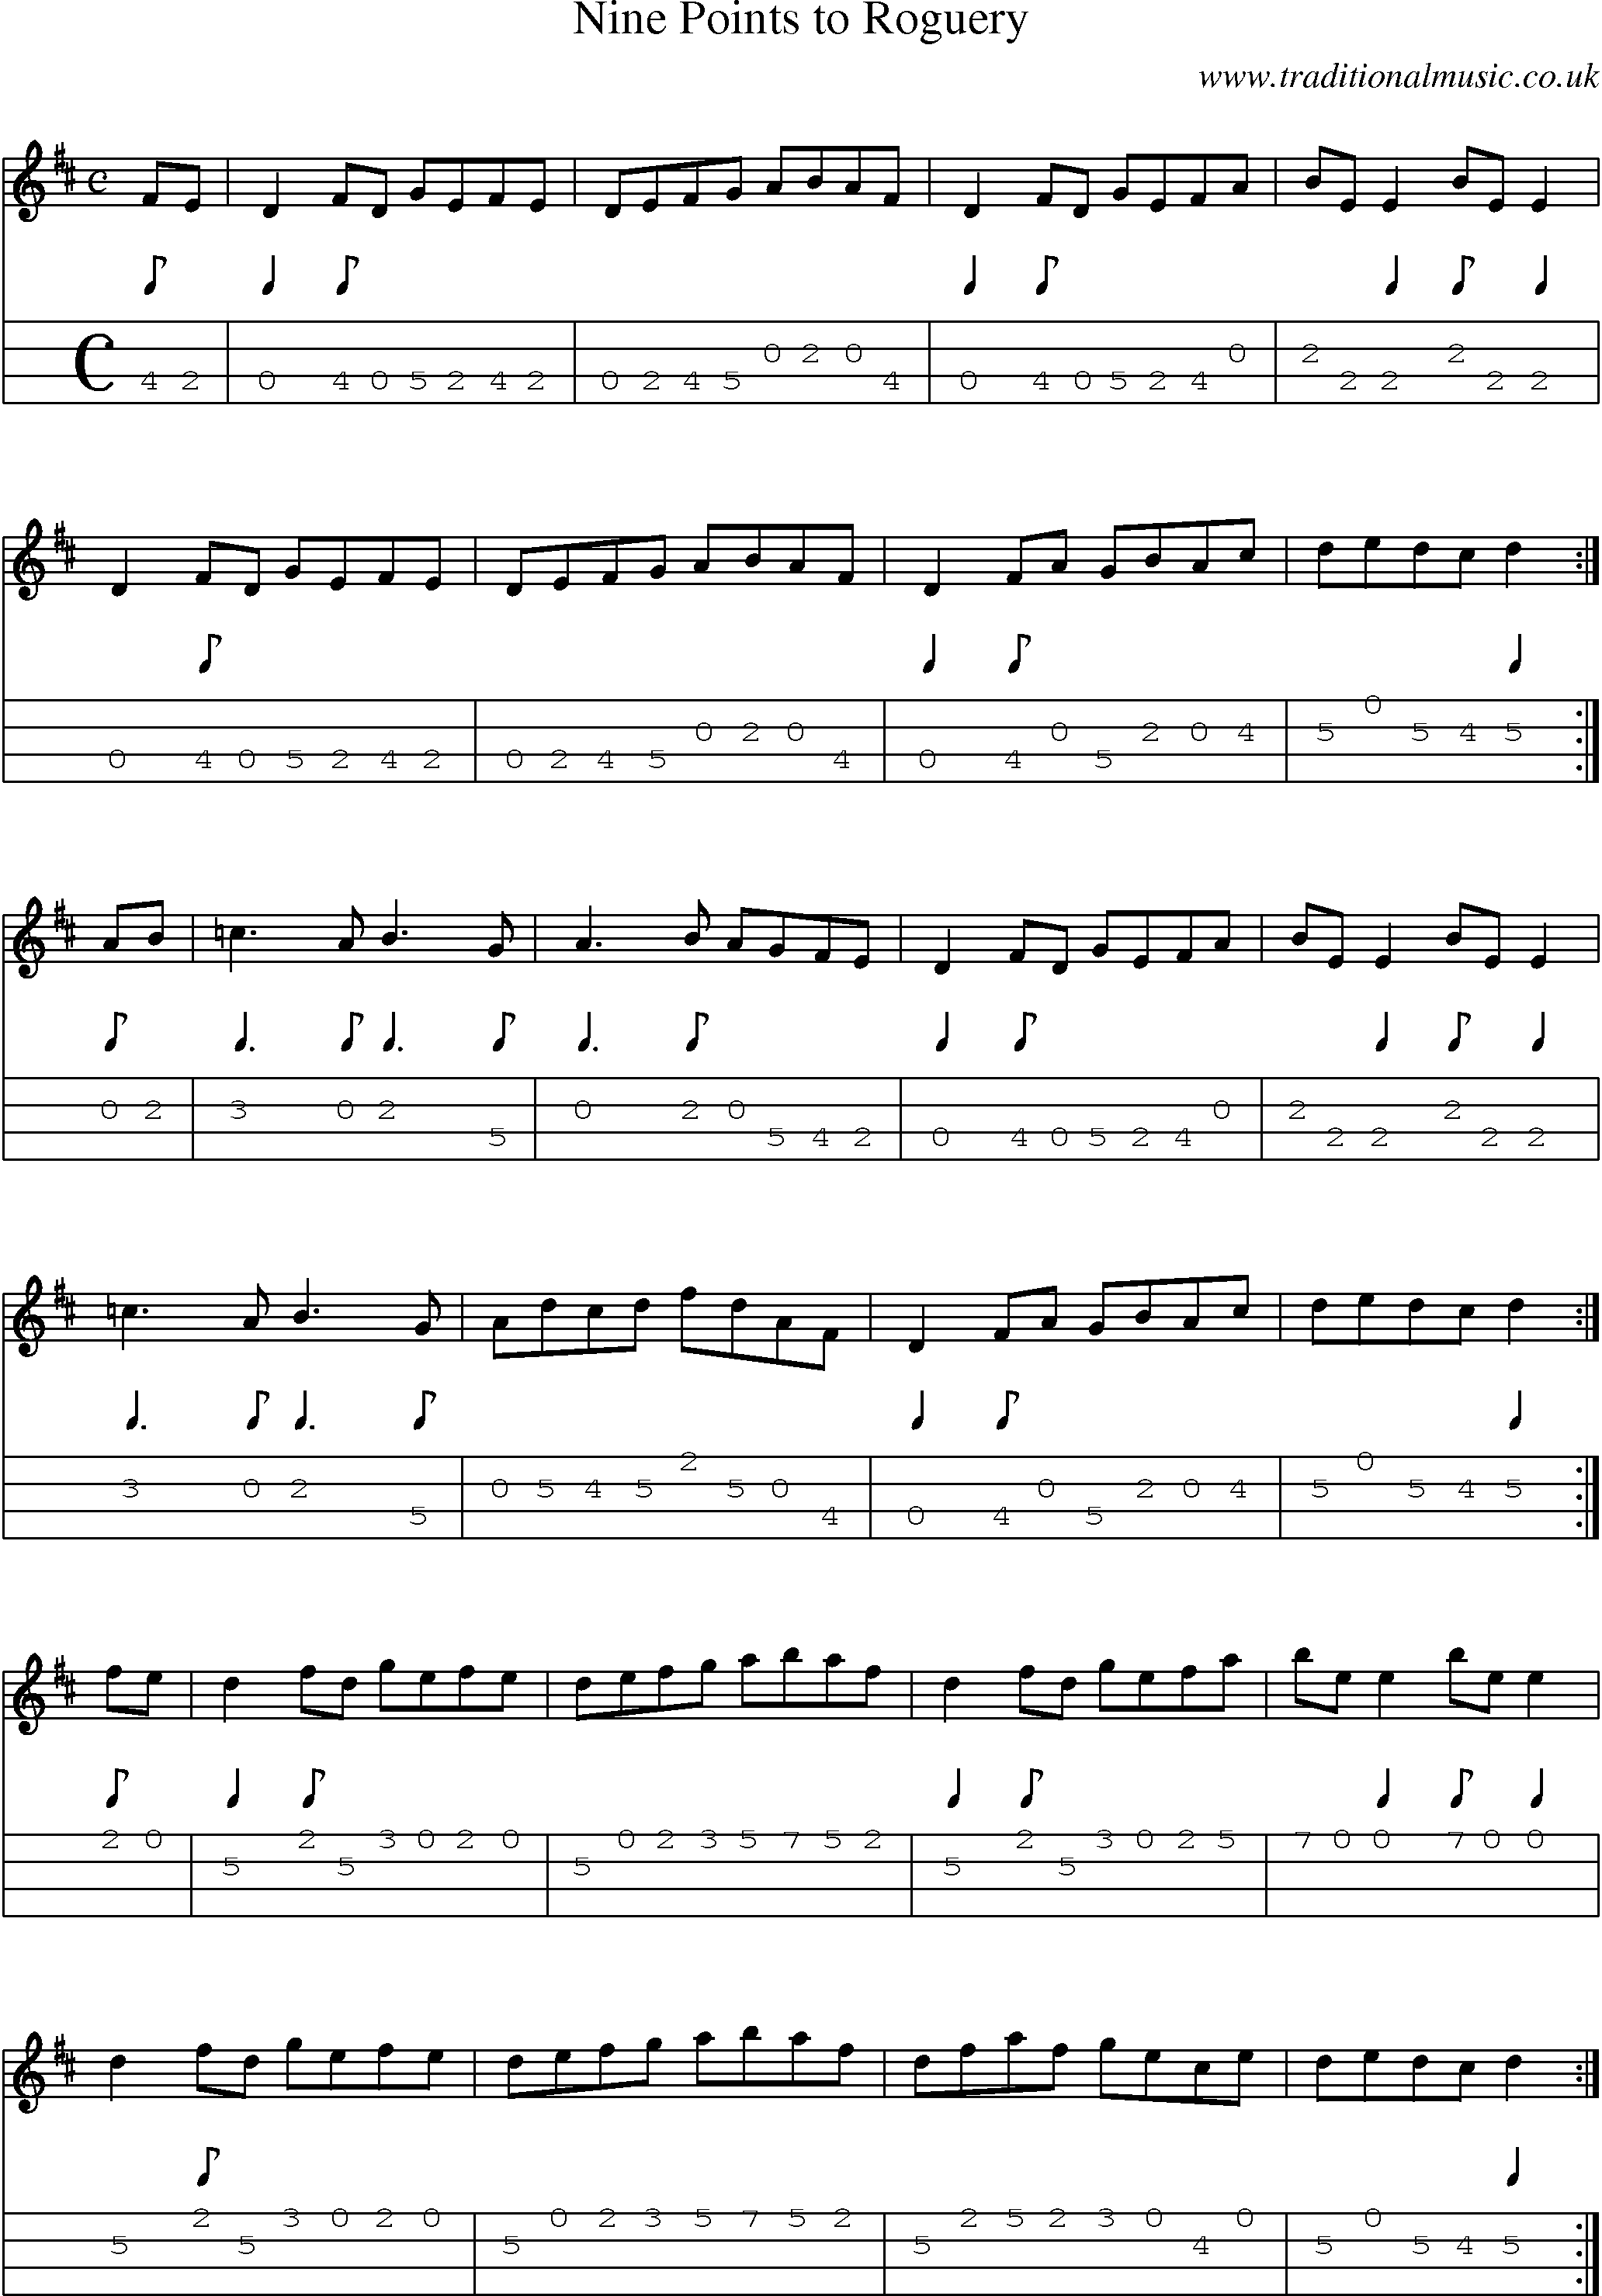 Music Score and Mandolin Tabs for Nine Points To Roguery